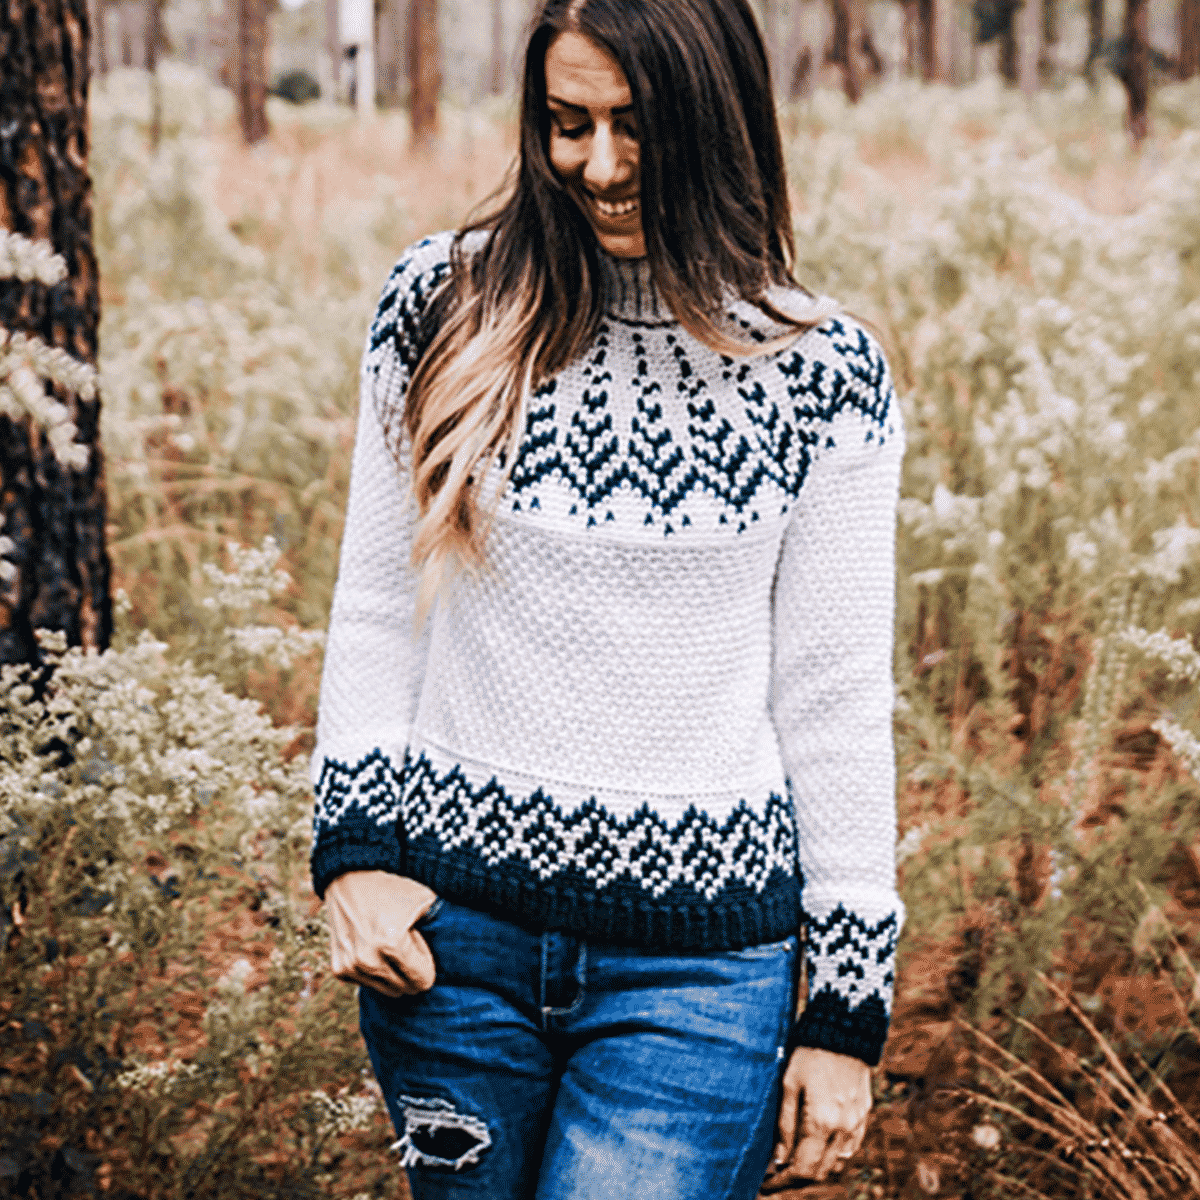 Explore Exciting Crochet Colorwork with the Gorgeous Pine Sweater Pattern